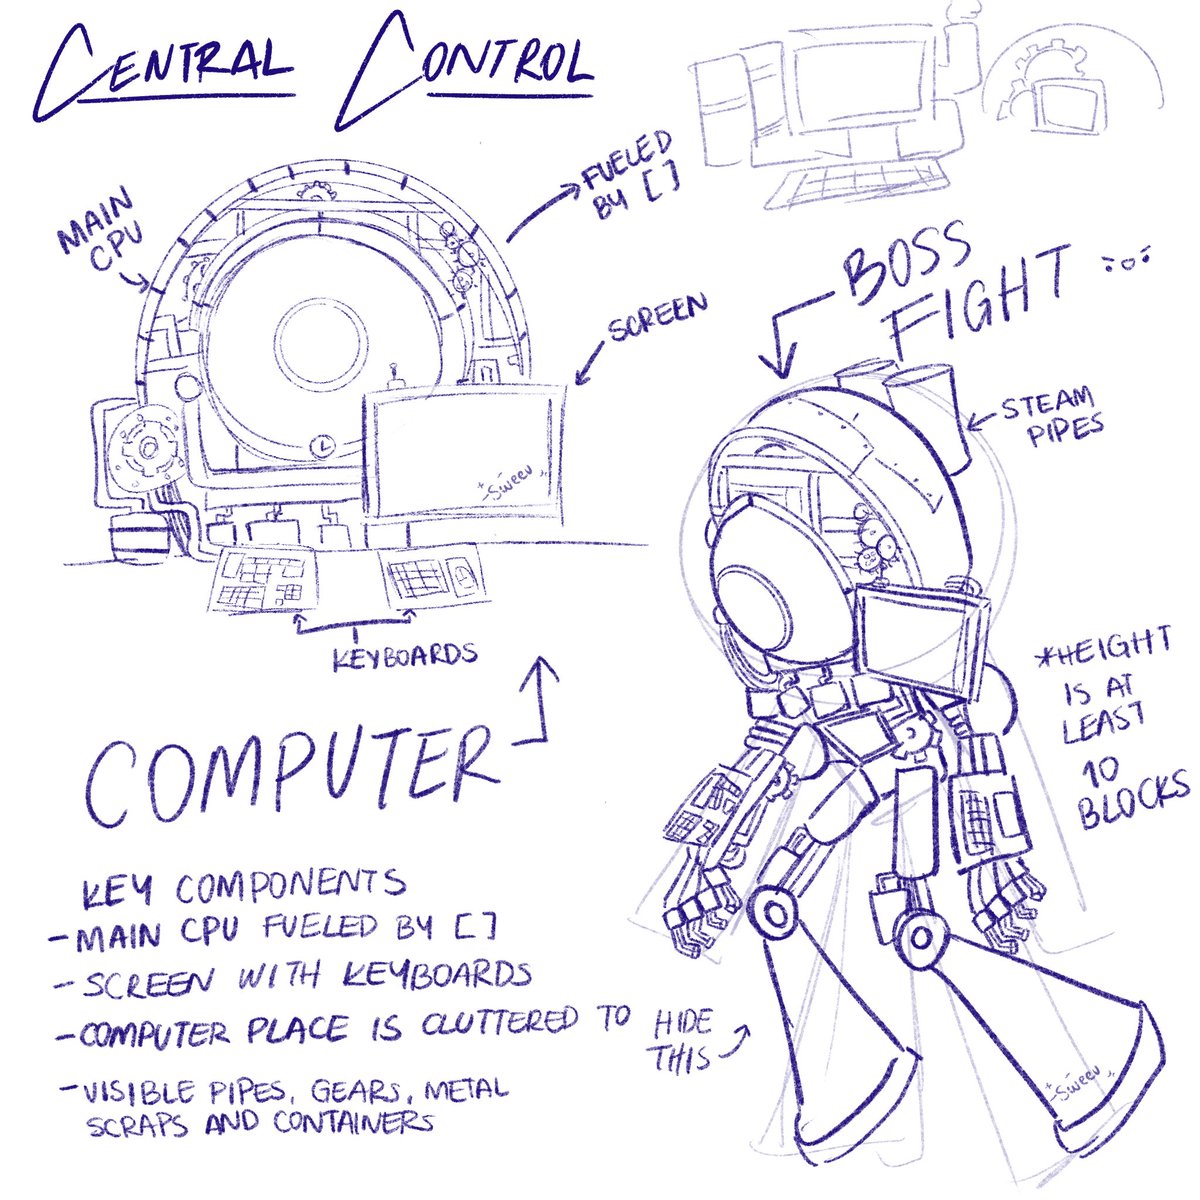 Fun fact! Did you know that there was a Tubbo vs Central Control boss battle in the works for QSMP Tubbo’s lore? Here are some sketches I made of the model! Follow up to the fun fact, @PancksN (Agent 18) was going to be the one fighting as Central Control!